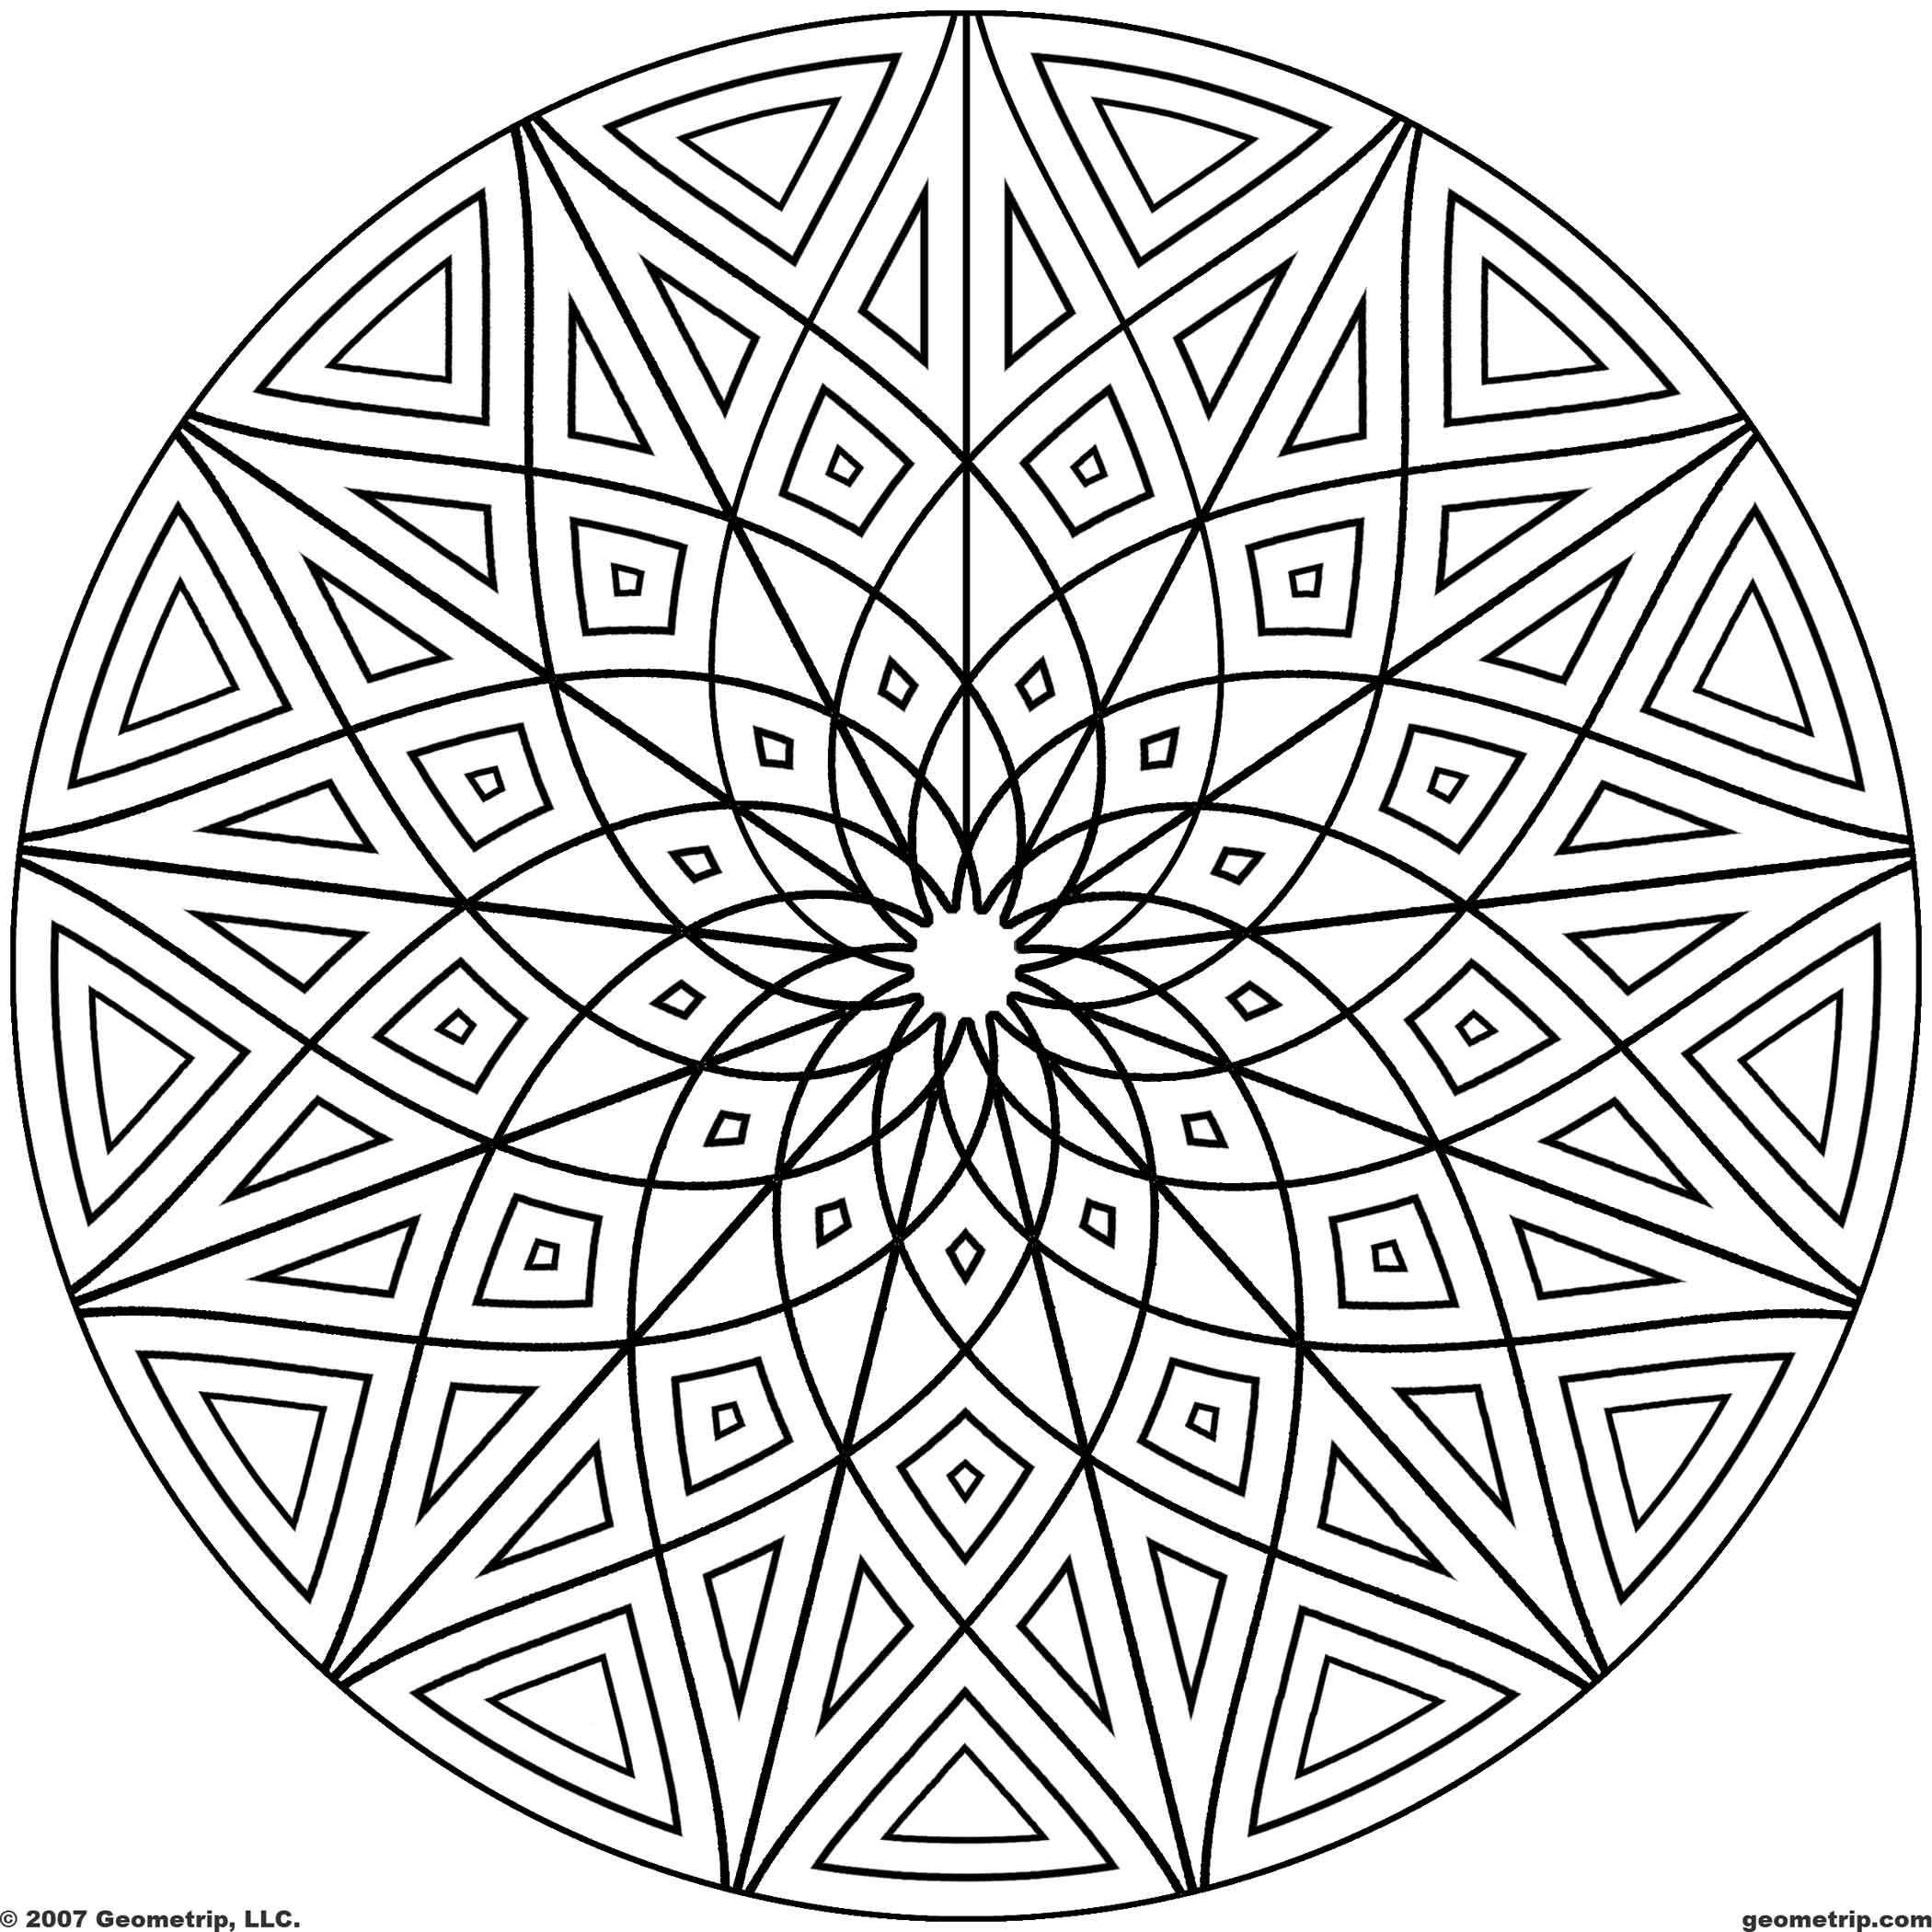 10 Pics of Geometric Design Pattern Coloring Pages Printable ...